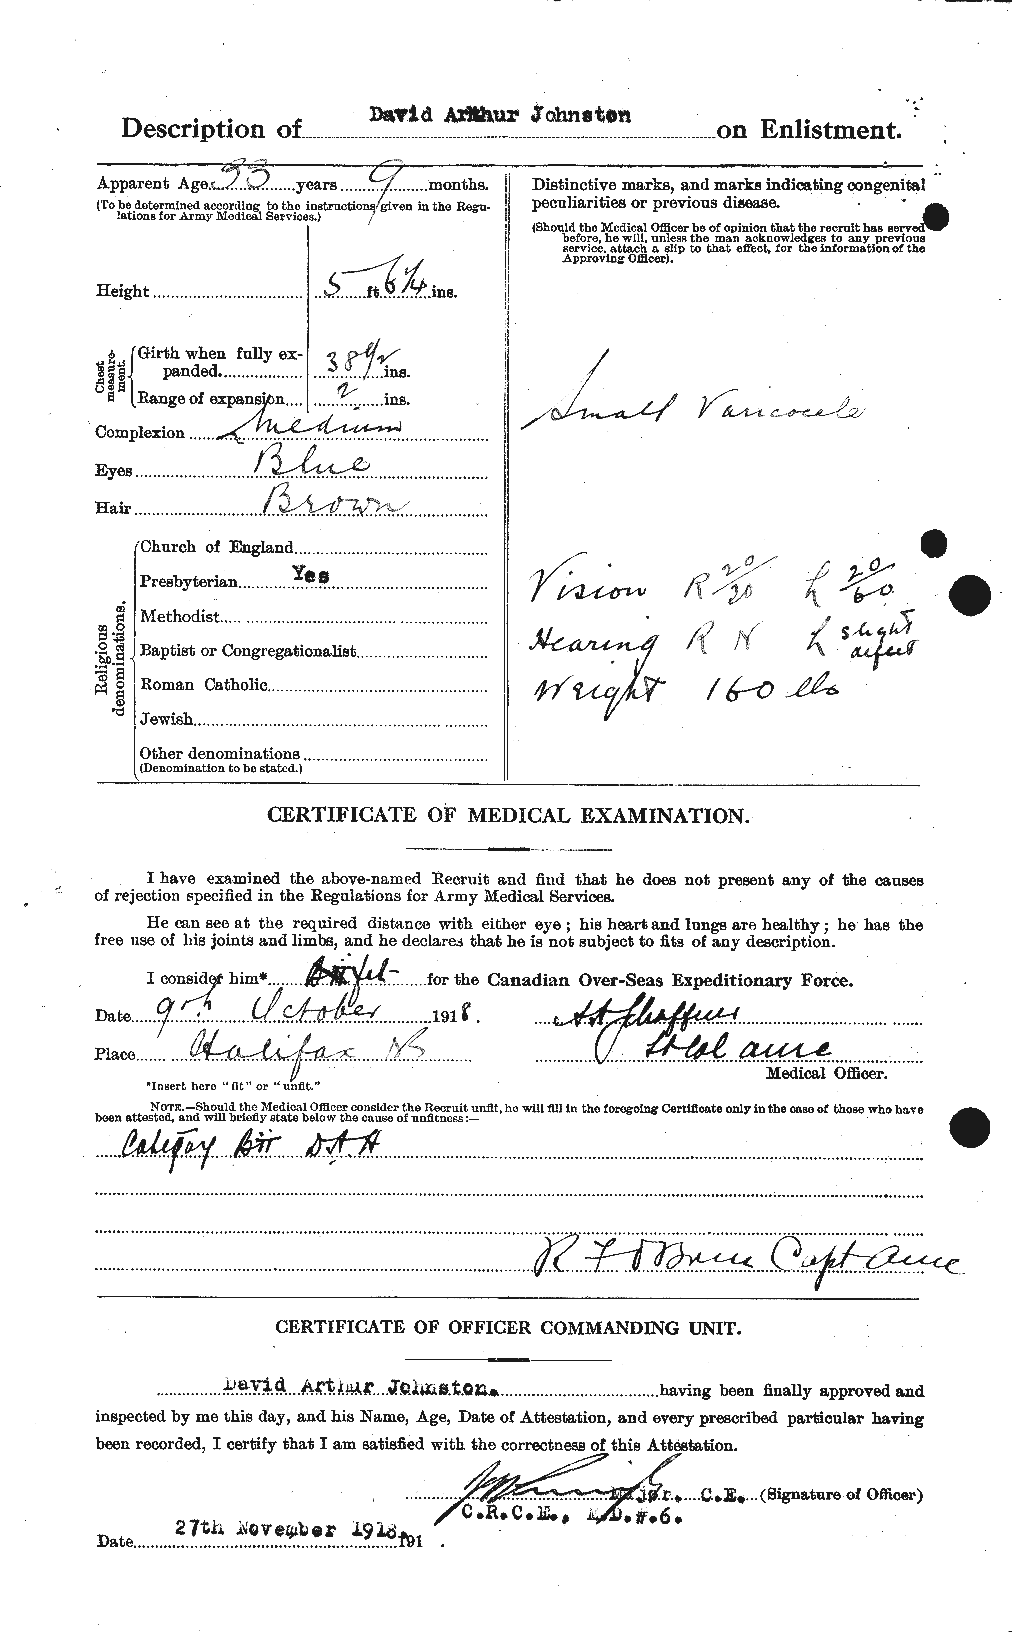 Personnel Records of the First World War - CEF 423168b